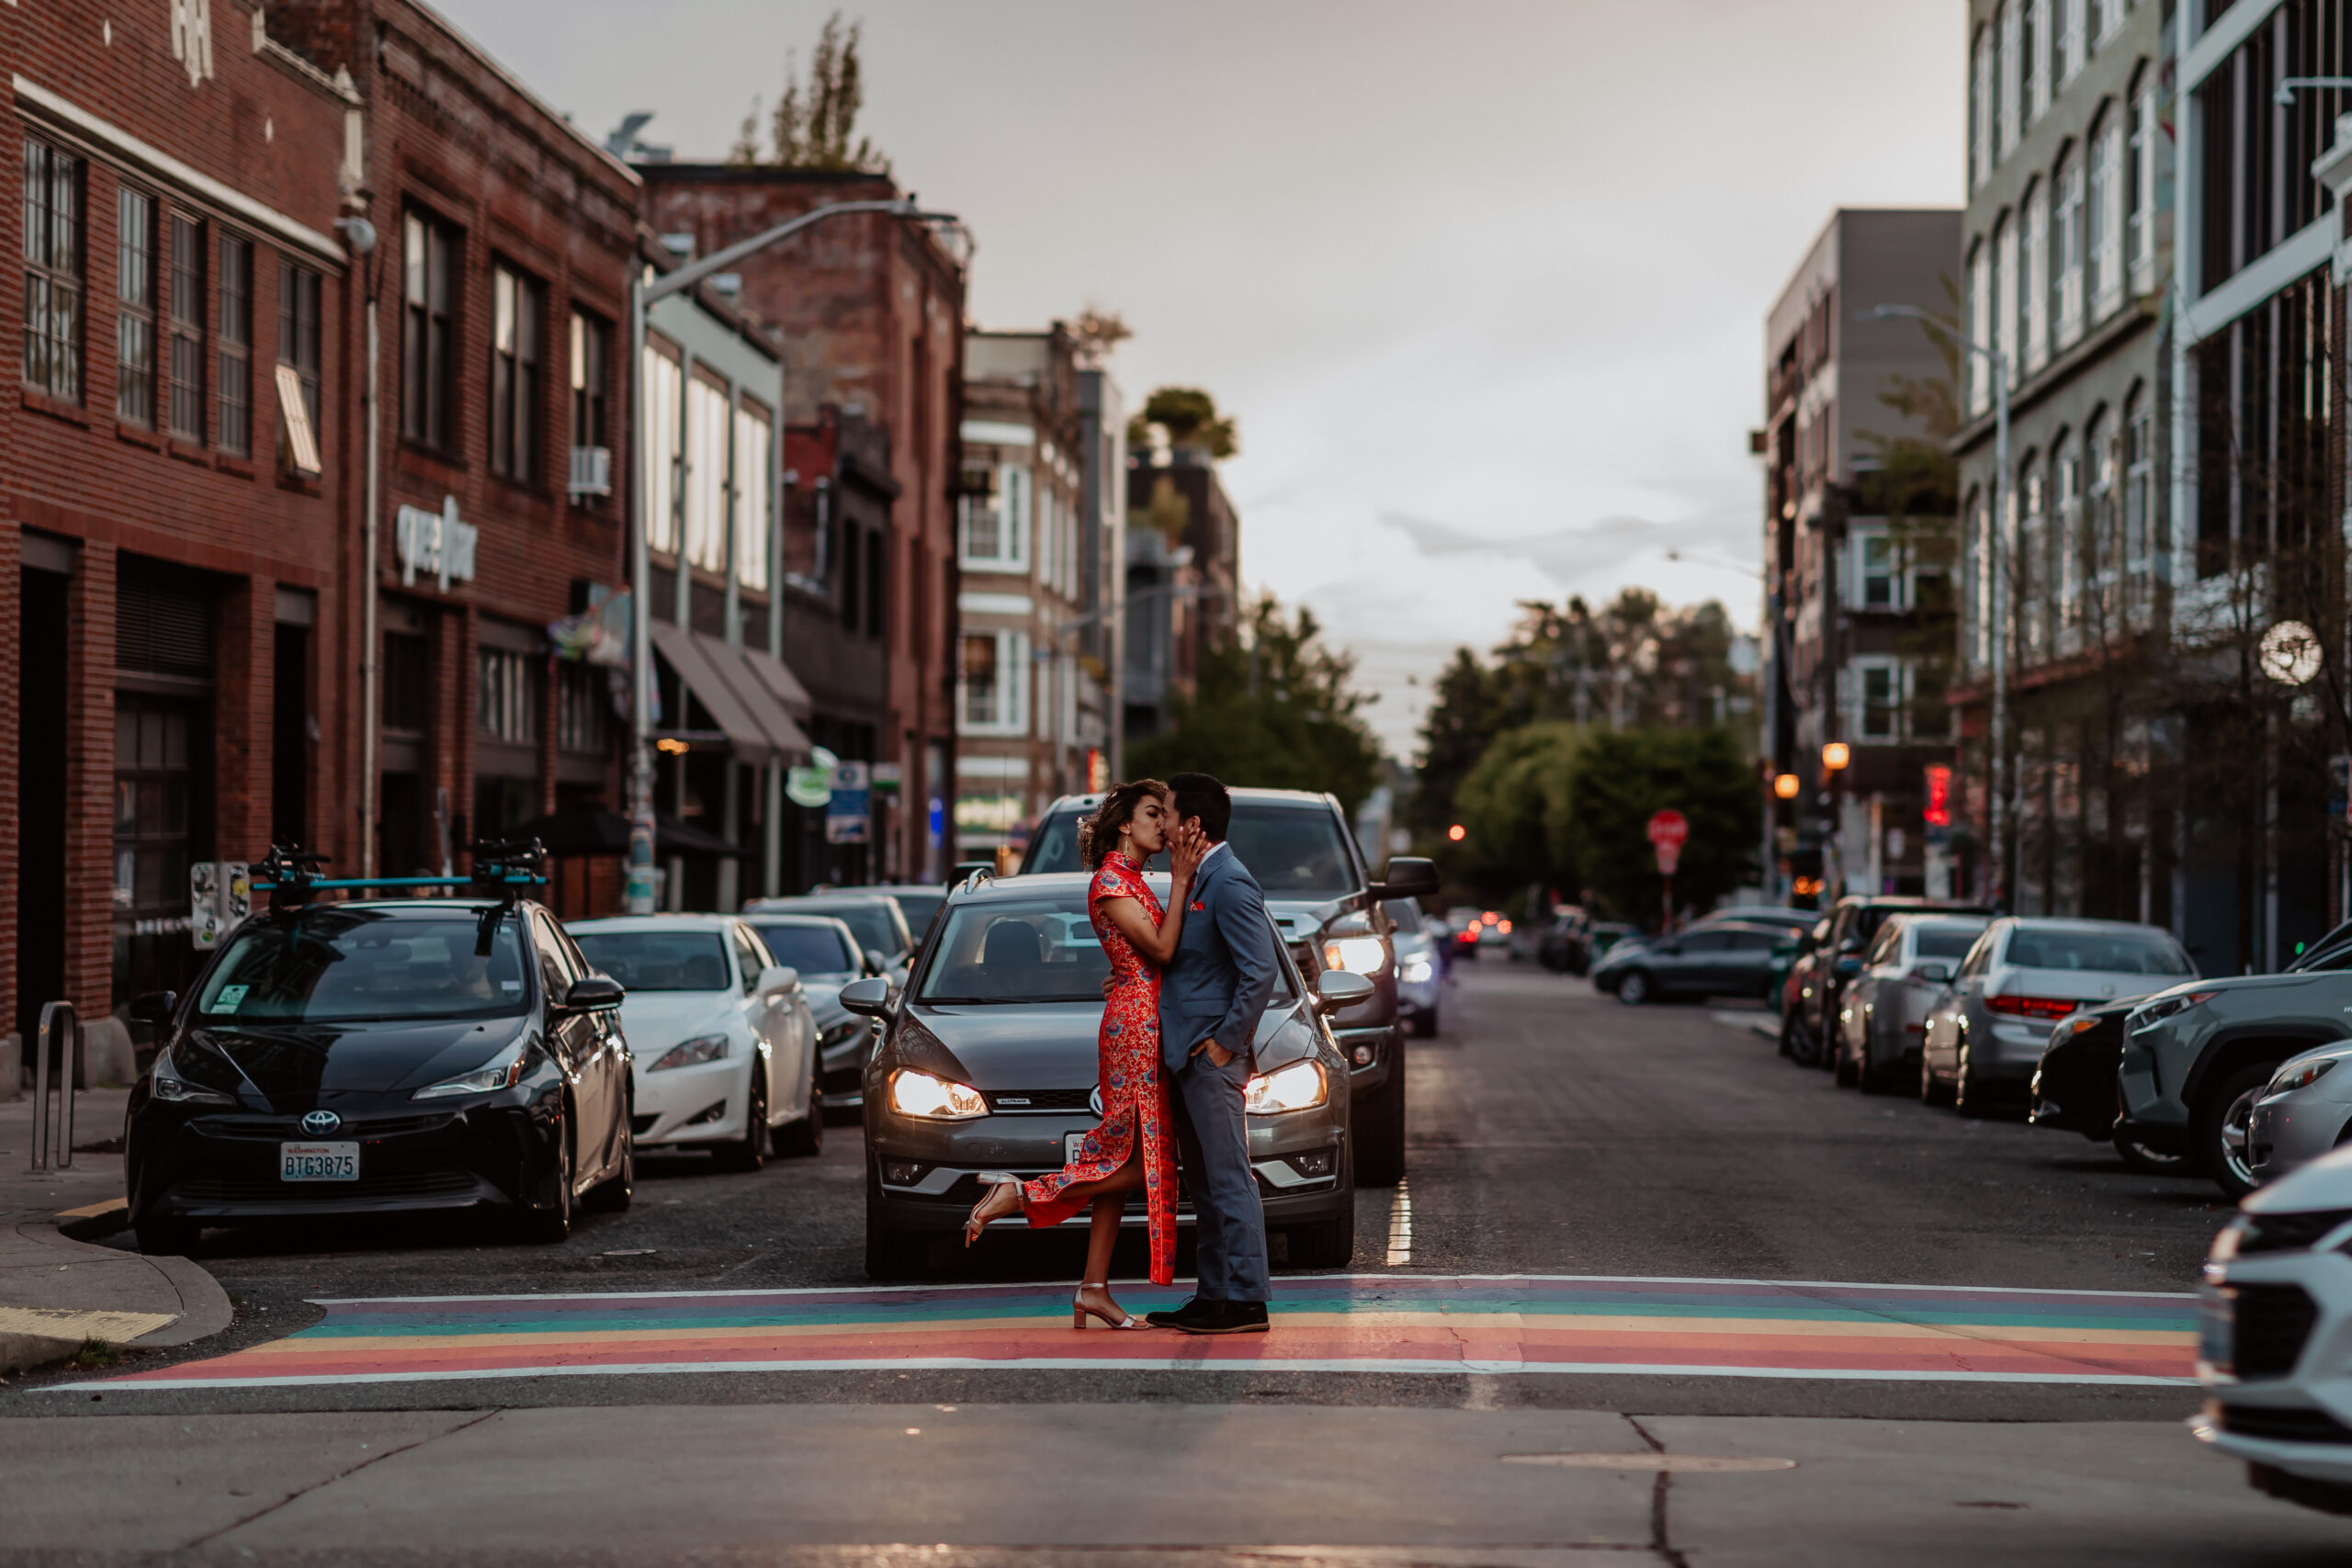 Couple wearing chinese wedding clothes kiss on rainbow crosswalk in Capitol Hill